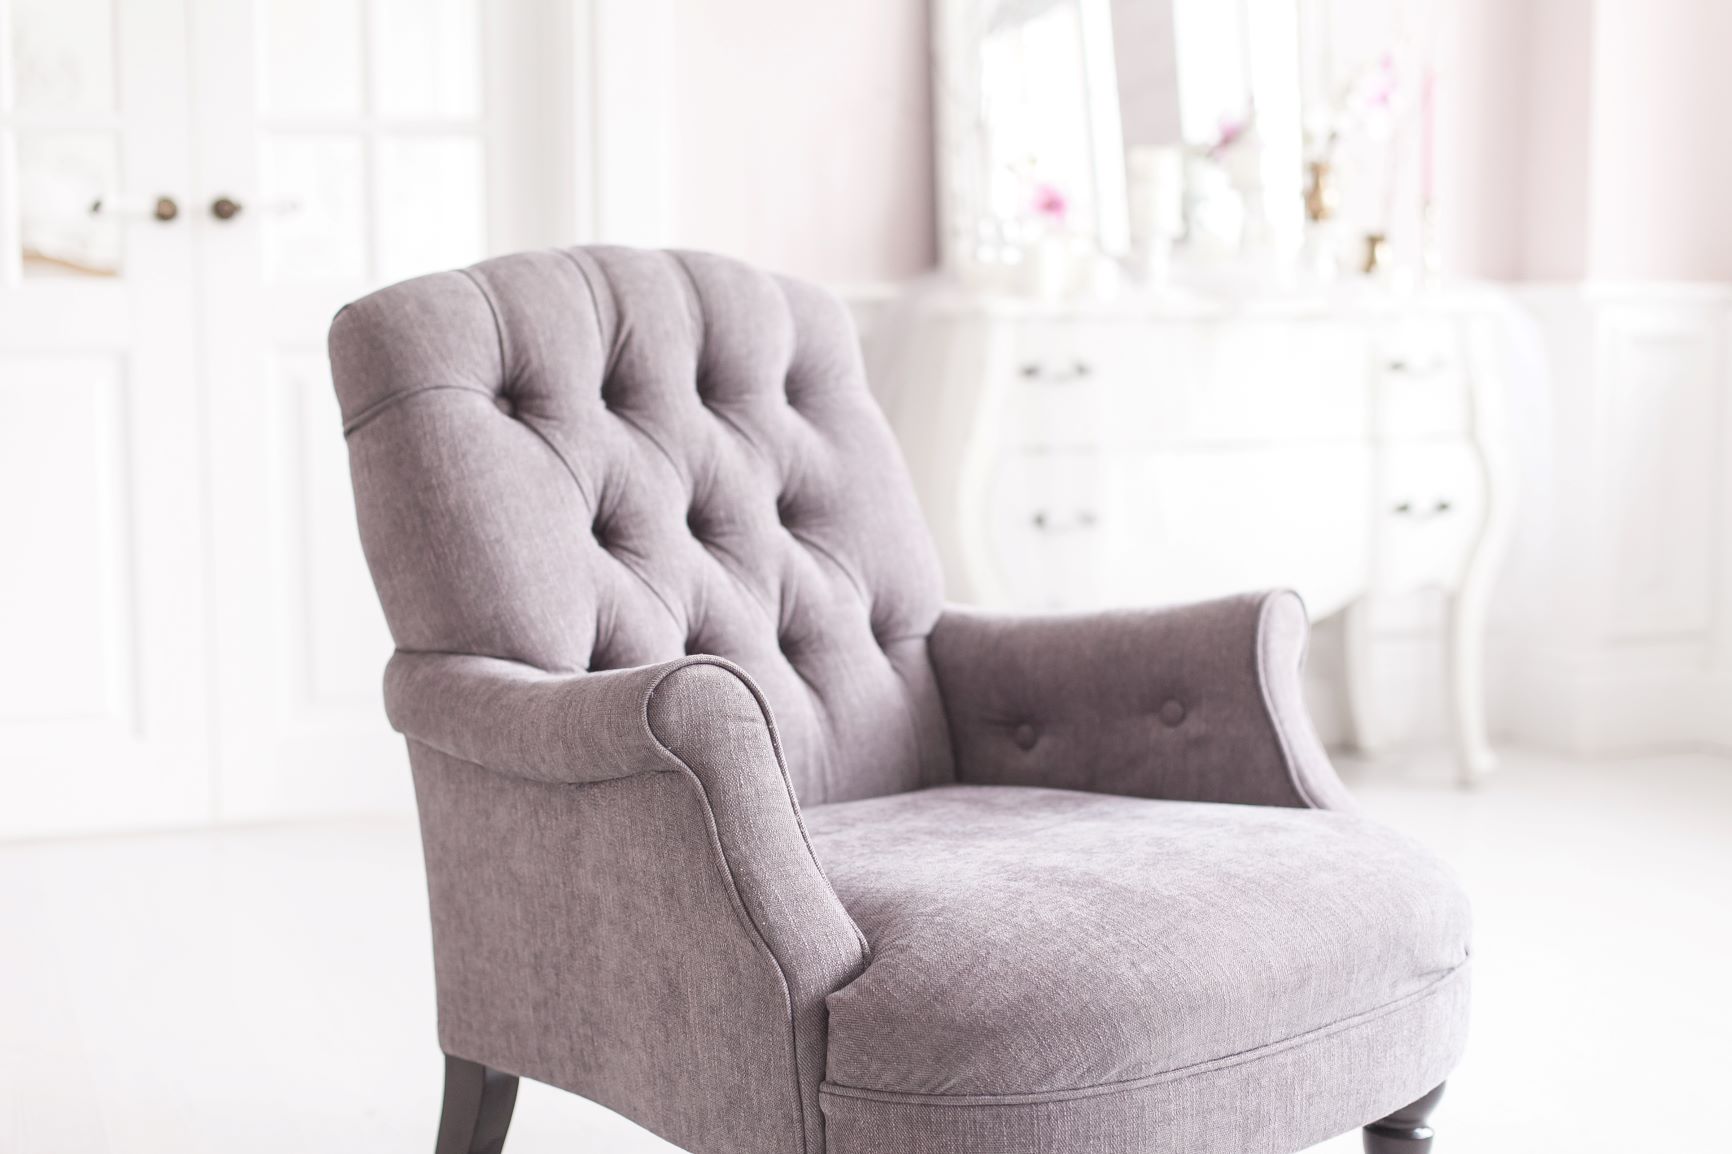 Turning your upholstery hobby into a profitable business